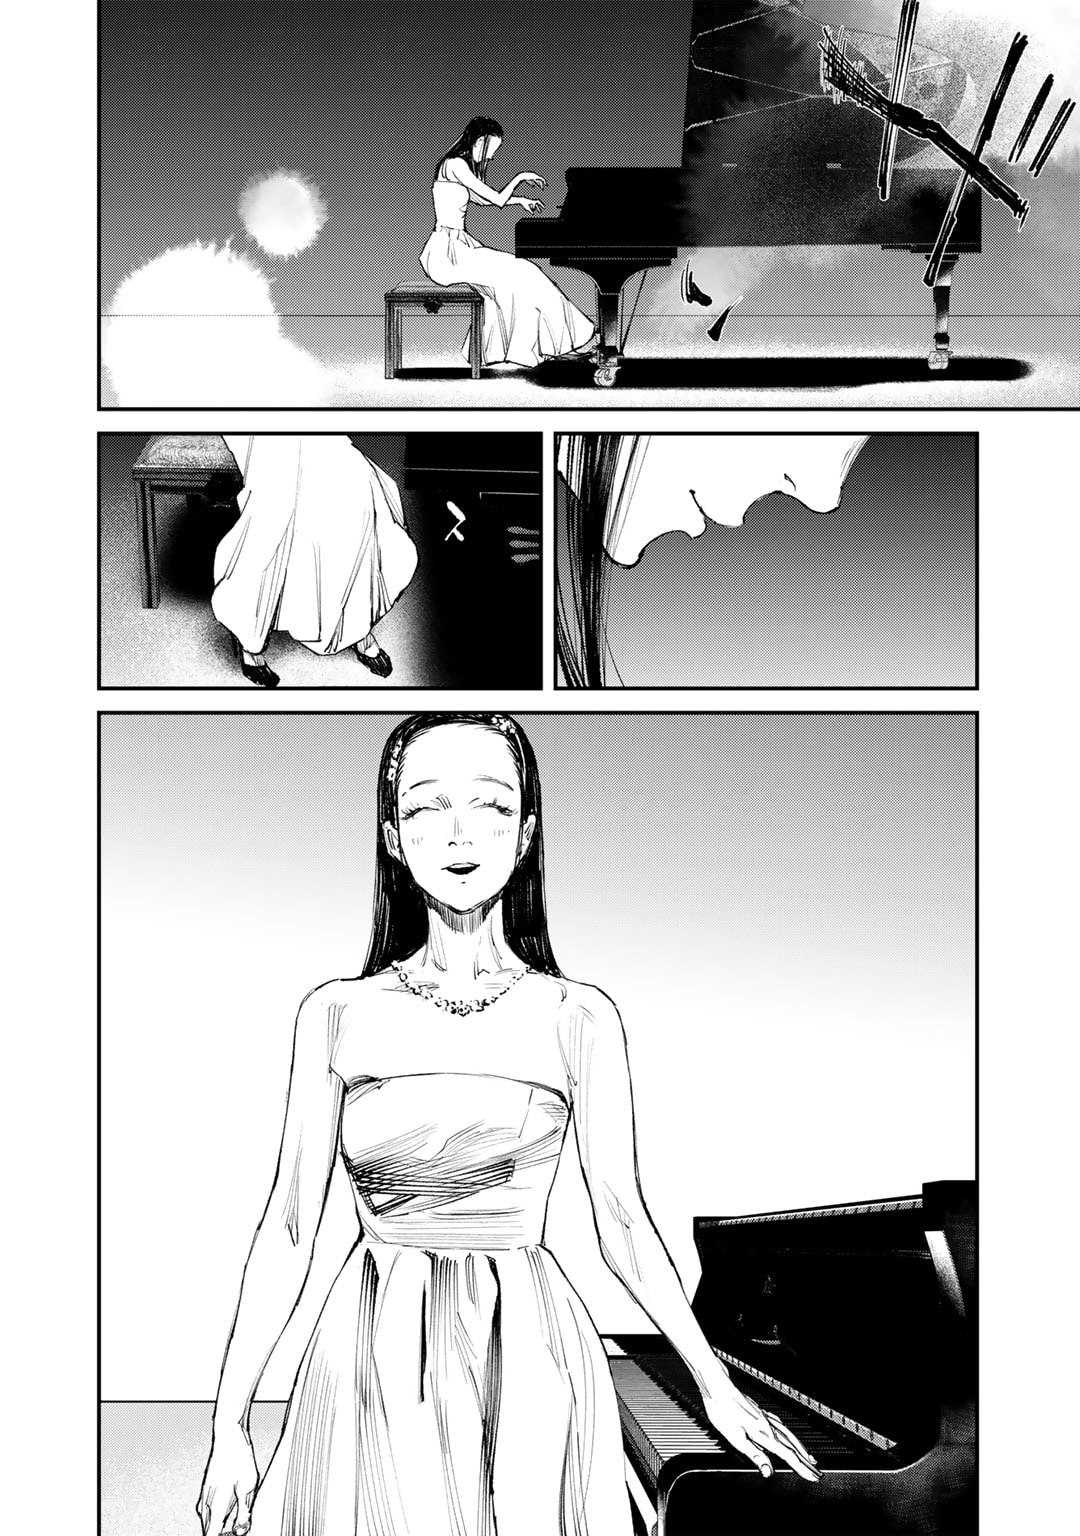 Kanata Is Into More Darker - Chapter 6 - Page 2